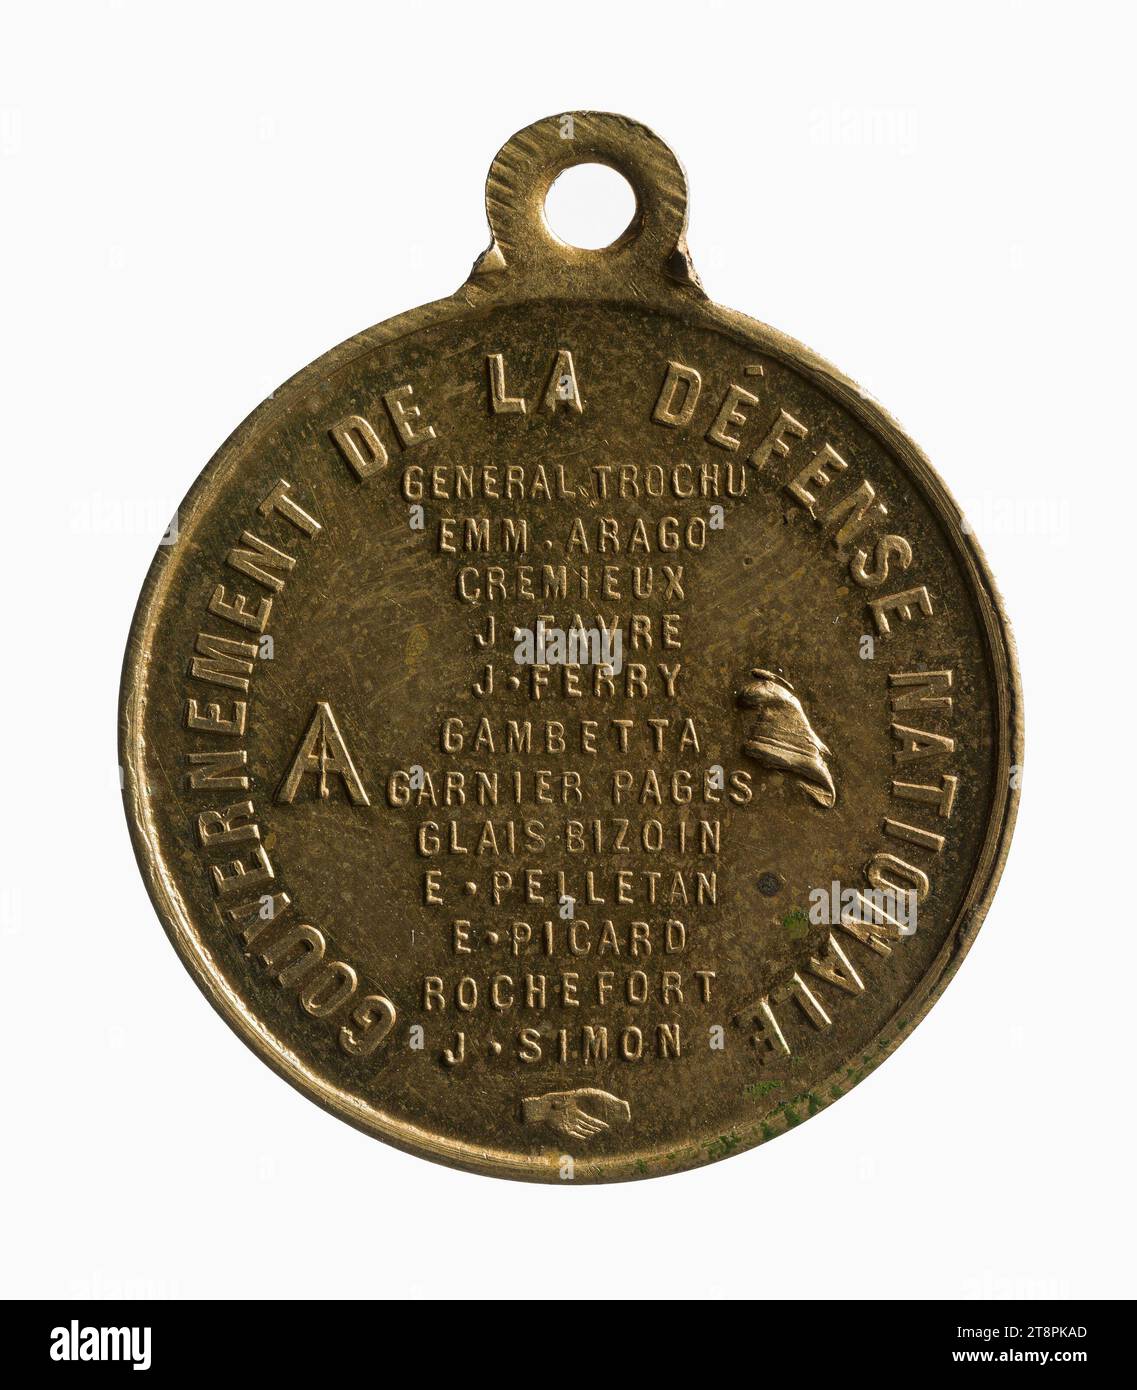 Jules Favre and the members of the government of the national defense, 19th century, 19th century, Numismatic, Medal, Copper, Gilt = gilding, Dimensions - Work: Diameter: 2.4 cm, Weight (type dimension): 4.89 g Stock Photo